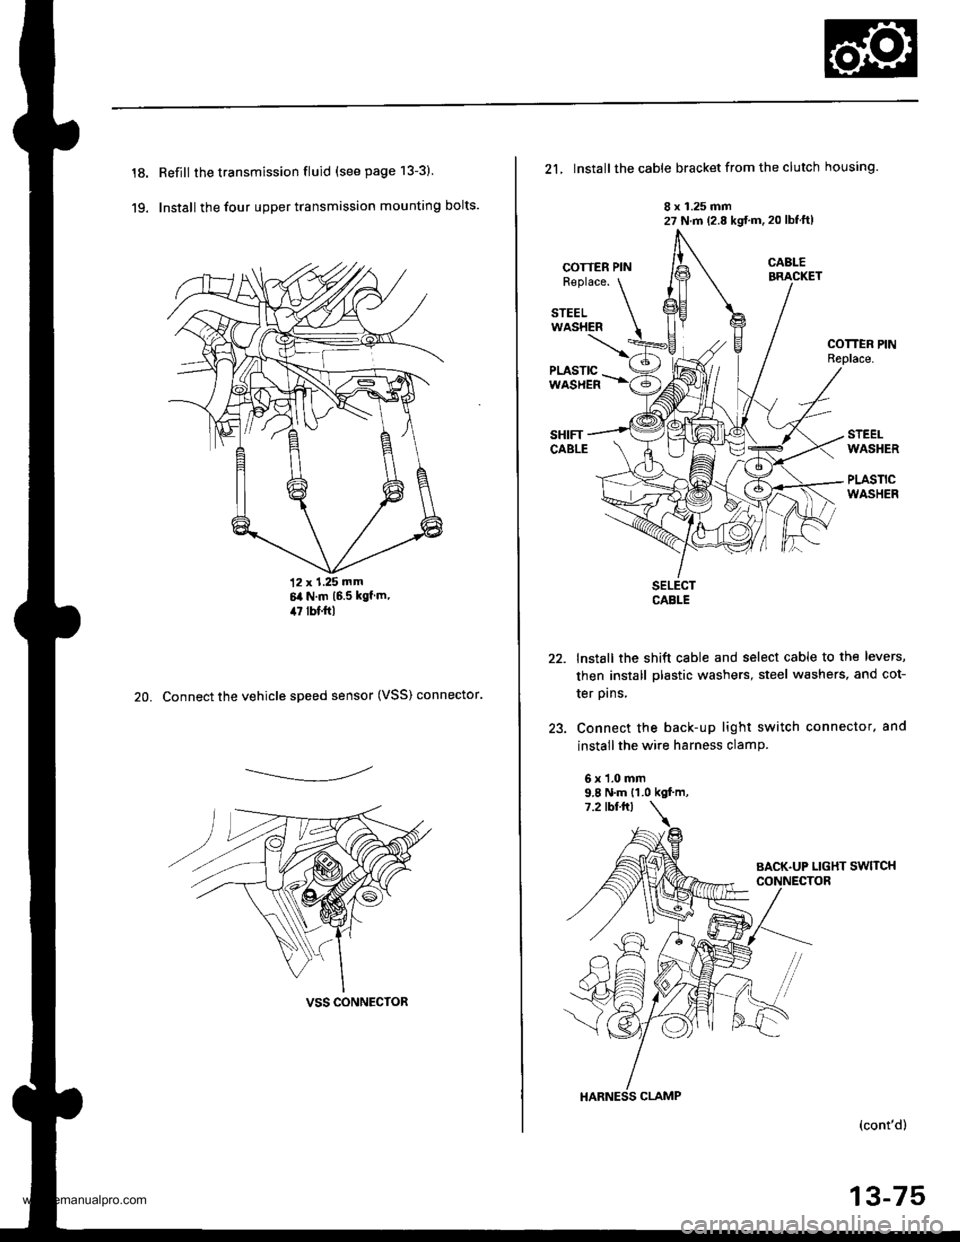 HONDA CR-V 2000 RD1-RD3 / 1.G Workshop Manual 
18.
19.
Refill the transmission fluid (see page 13-3)
Install the four upper transmission mounting bolts.
12 x 1.25 mm6it N.m 16.5 kgf m,il7 lbf.ftl
20. Connect the vehicle speed sensor (VSS) connect